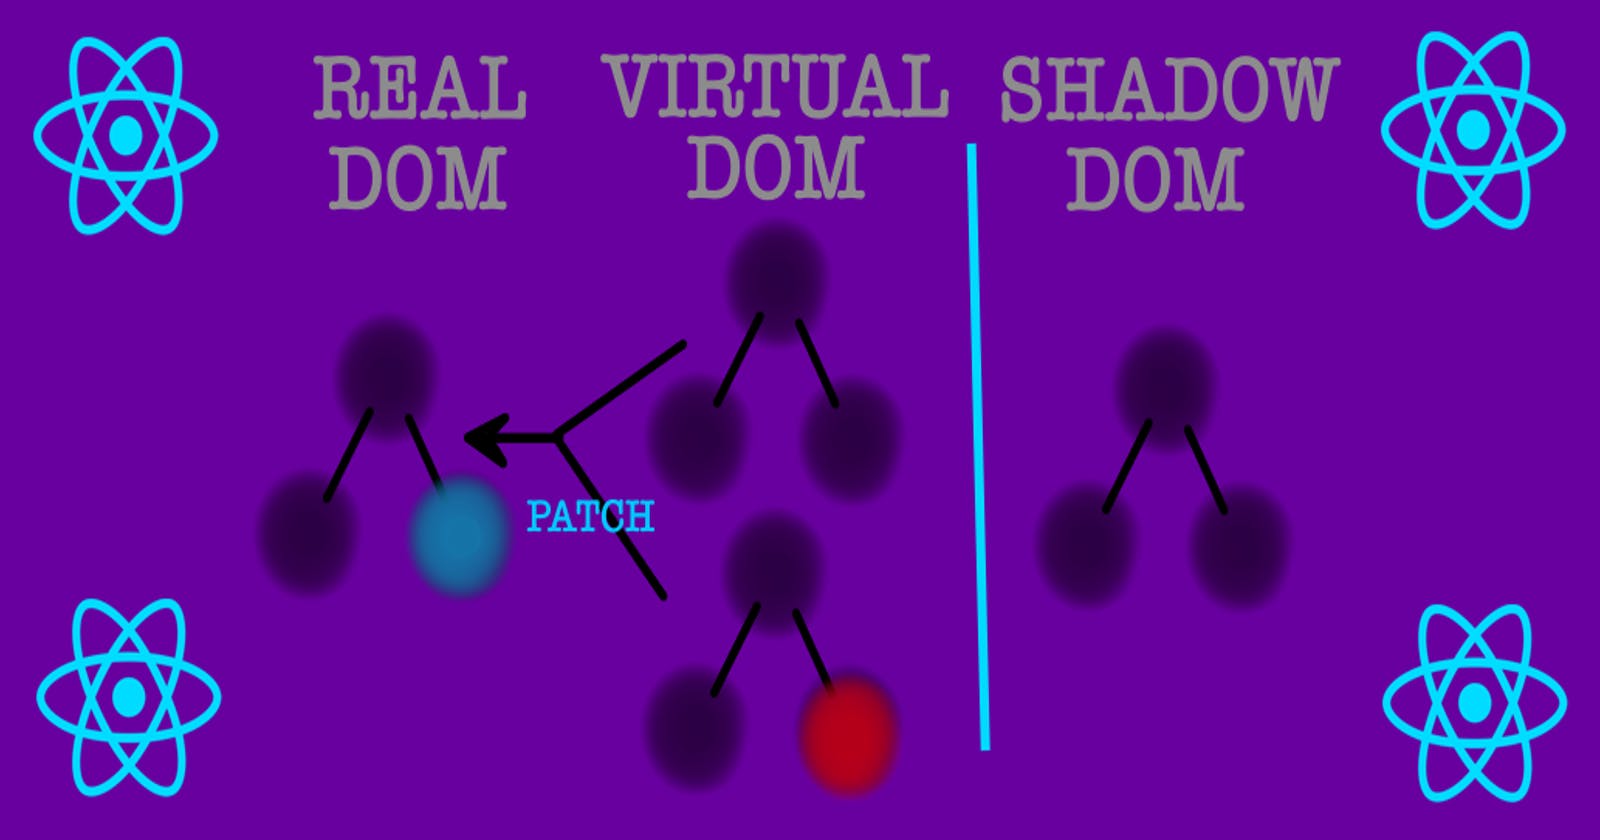 Real DOM, Virtual DOM, Shadow DOM, What's the Difference?